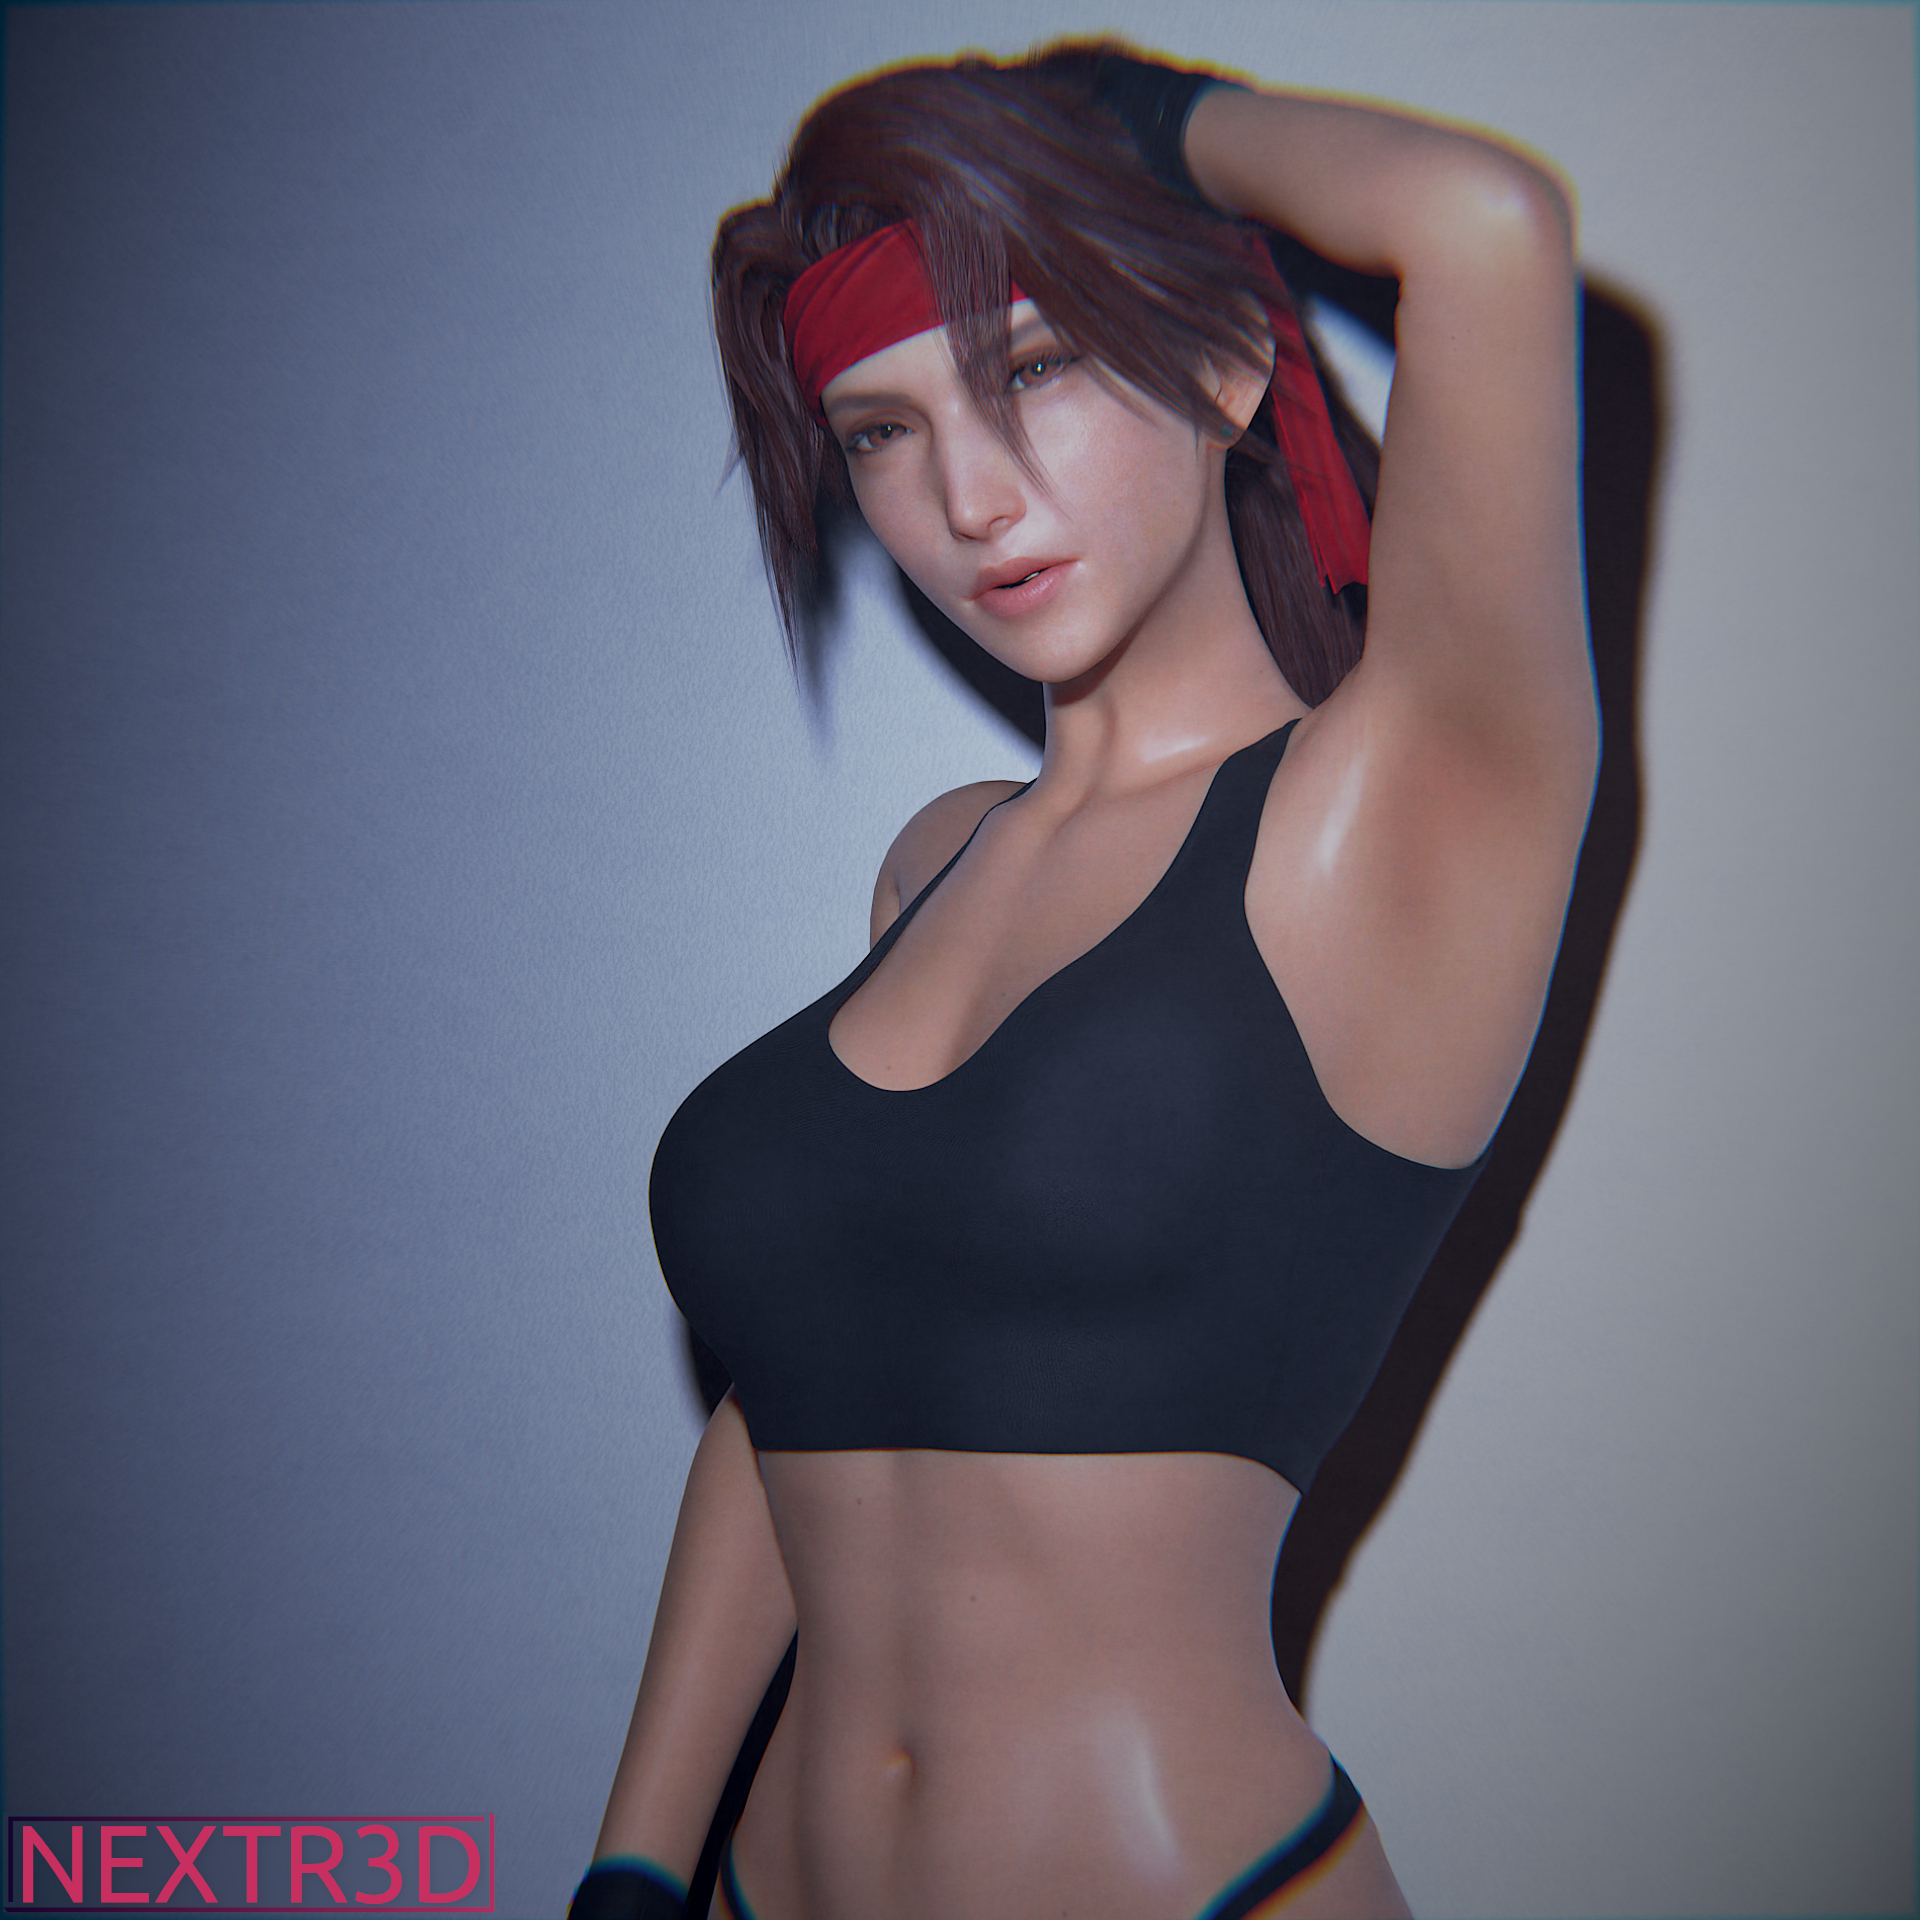 nextr on X: Jessie by @MustardSFM free candy here ->  t.coUM4h1Ll6N2 (and more awesome stuff) t.cof8ieLgmXgJ   X